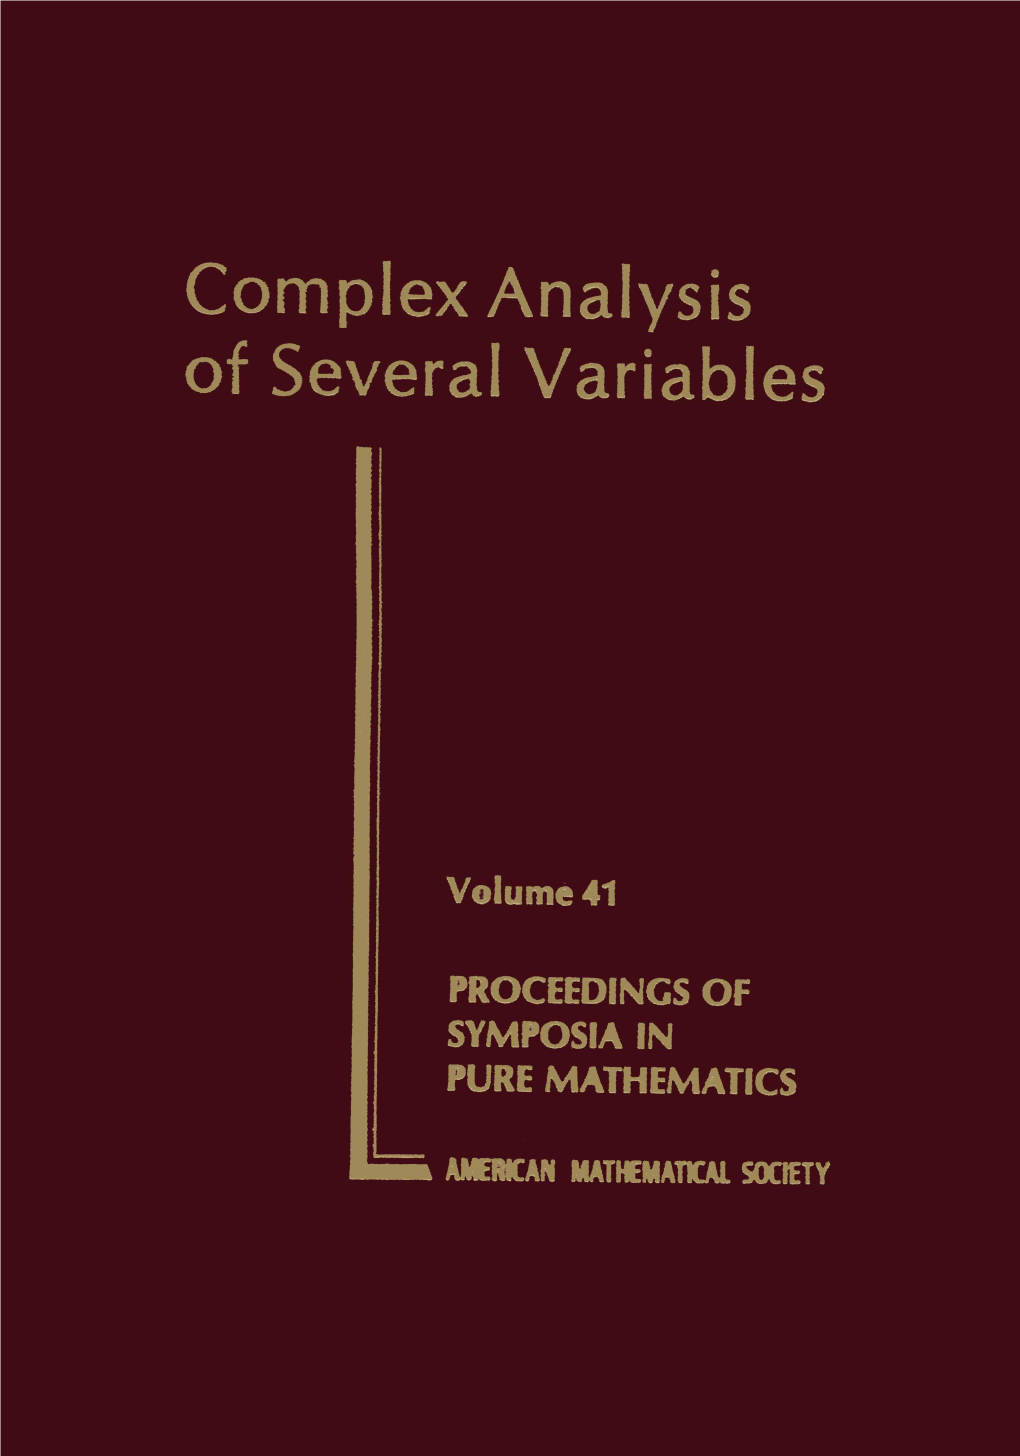 Complex Analysis of Several Variables, Volume 41